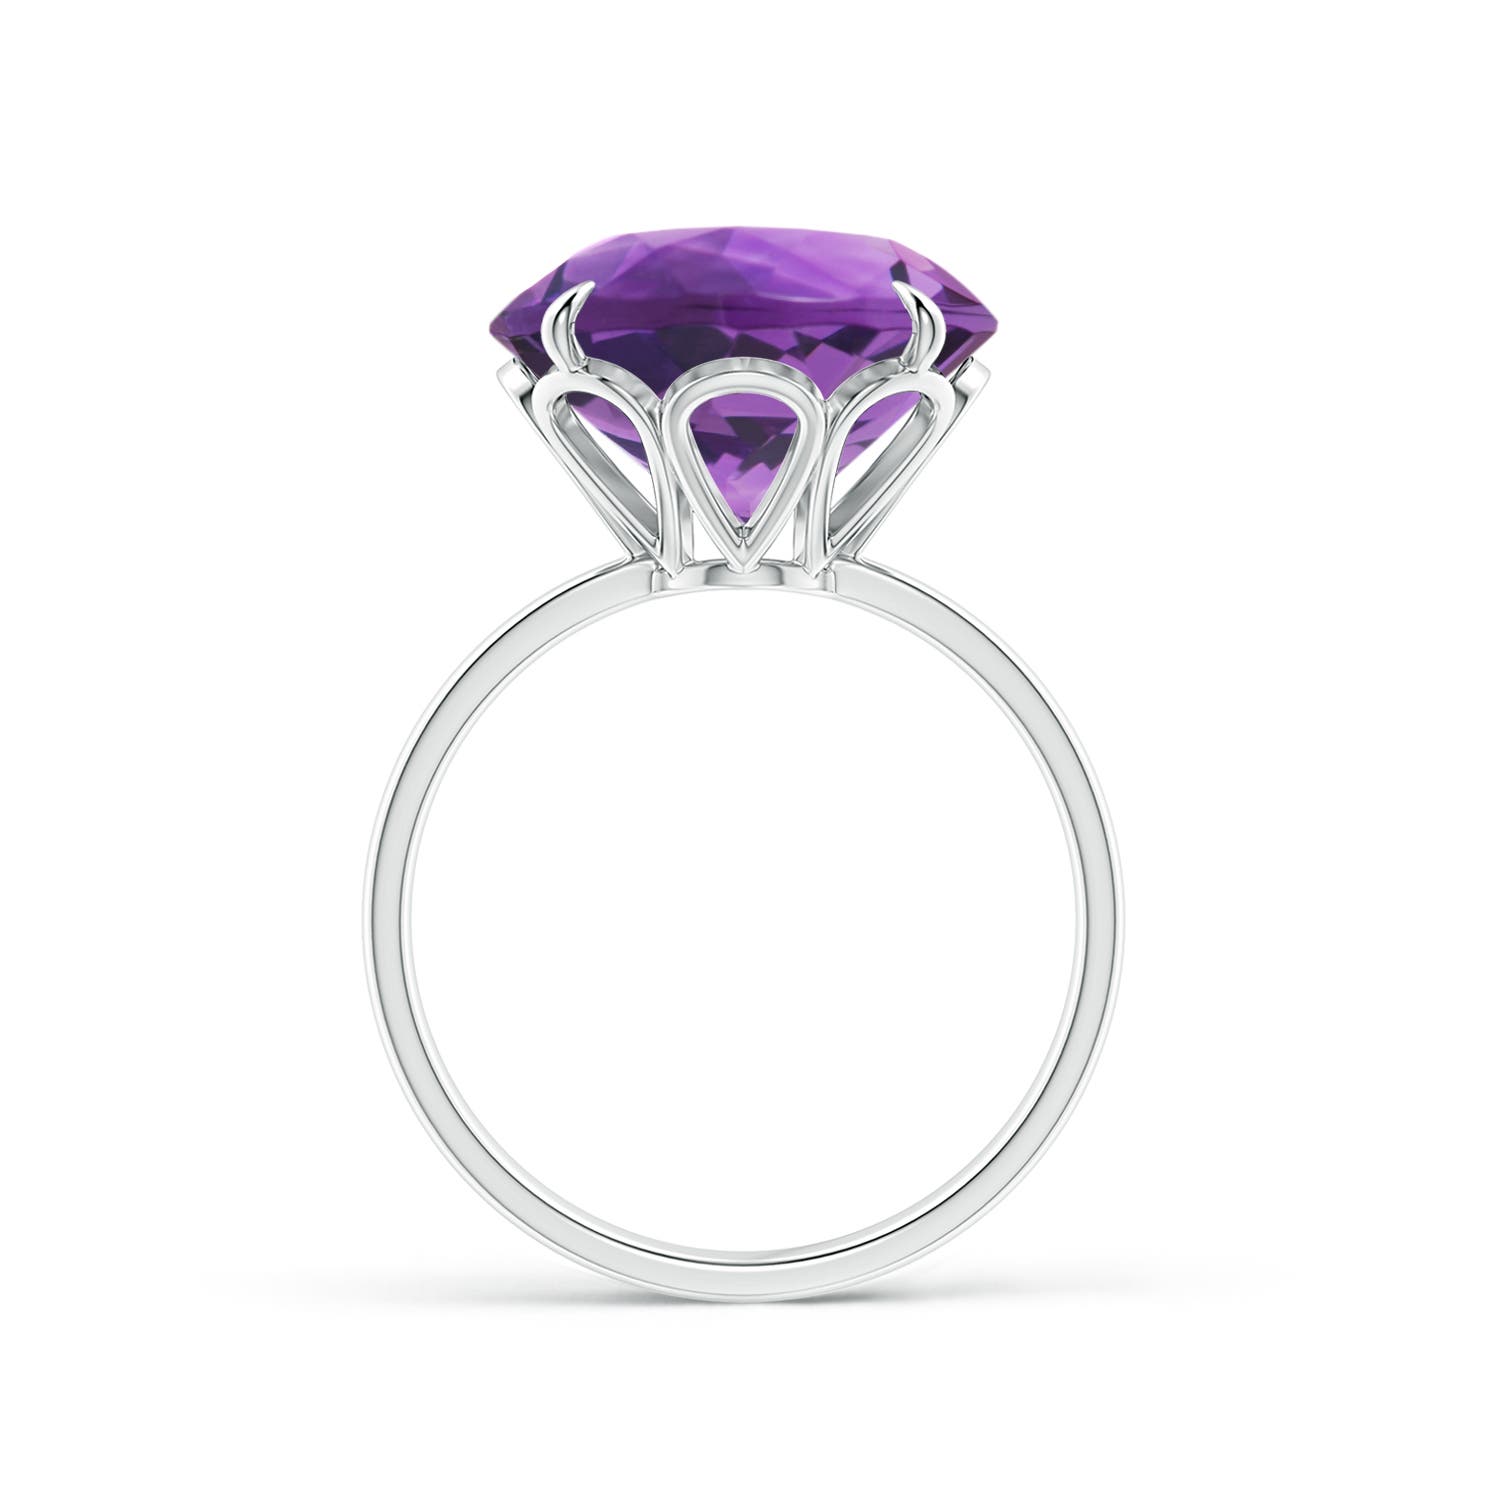 AAA - Amethyst / 7.2 CT / 14 KT White Gold